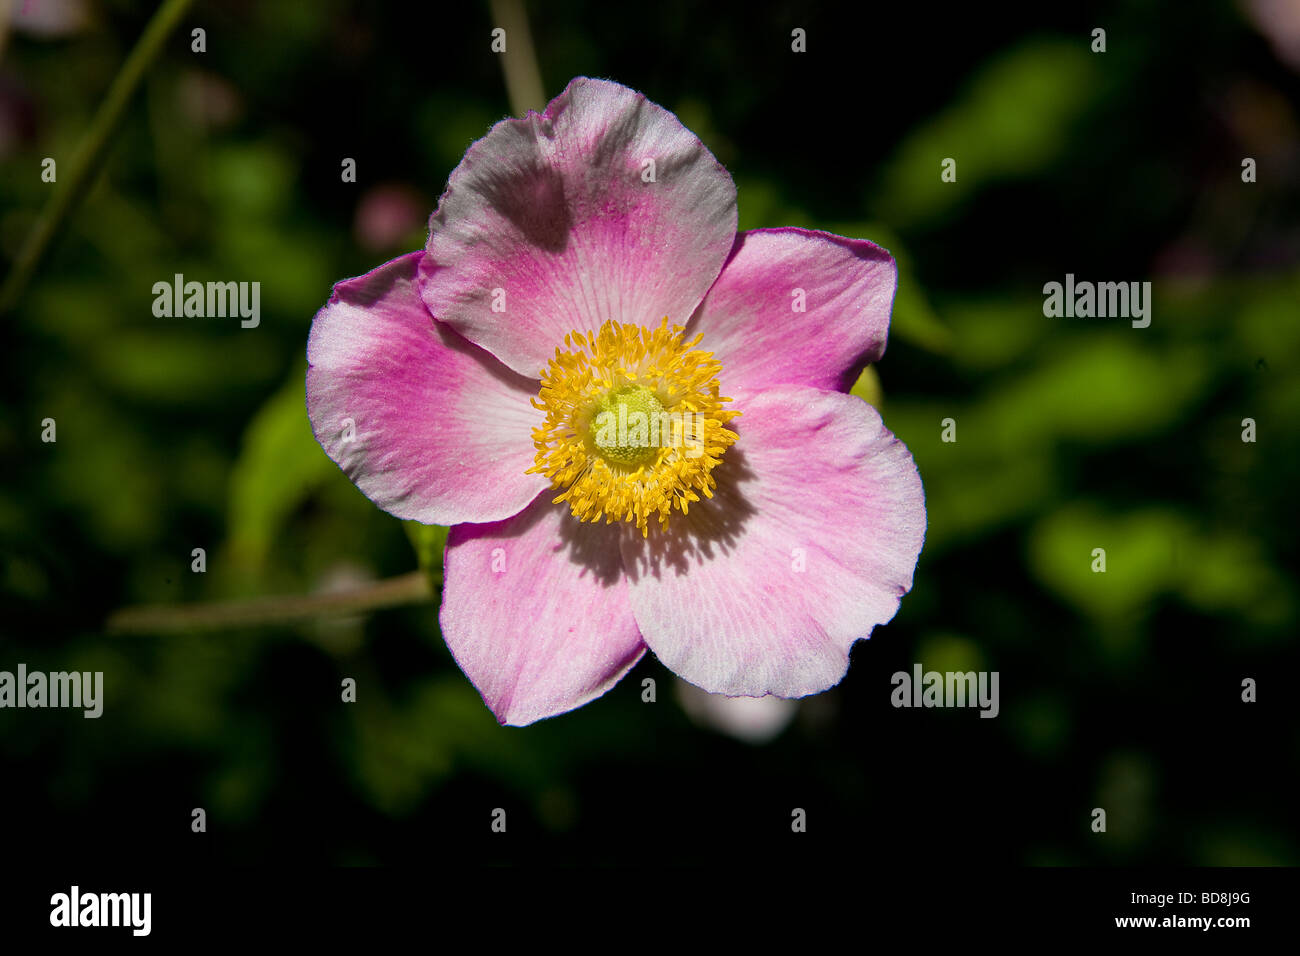 a pink windflower or Japanese Anemone sits in the sun with its greenery shown out of focus and in the shade Stock Photo